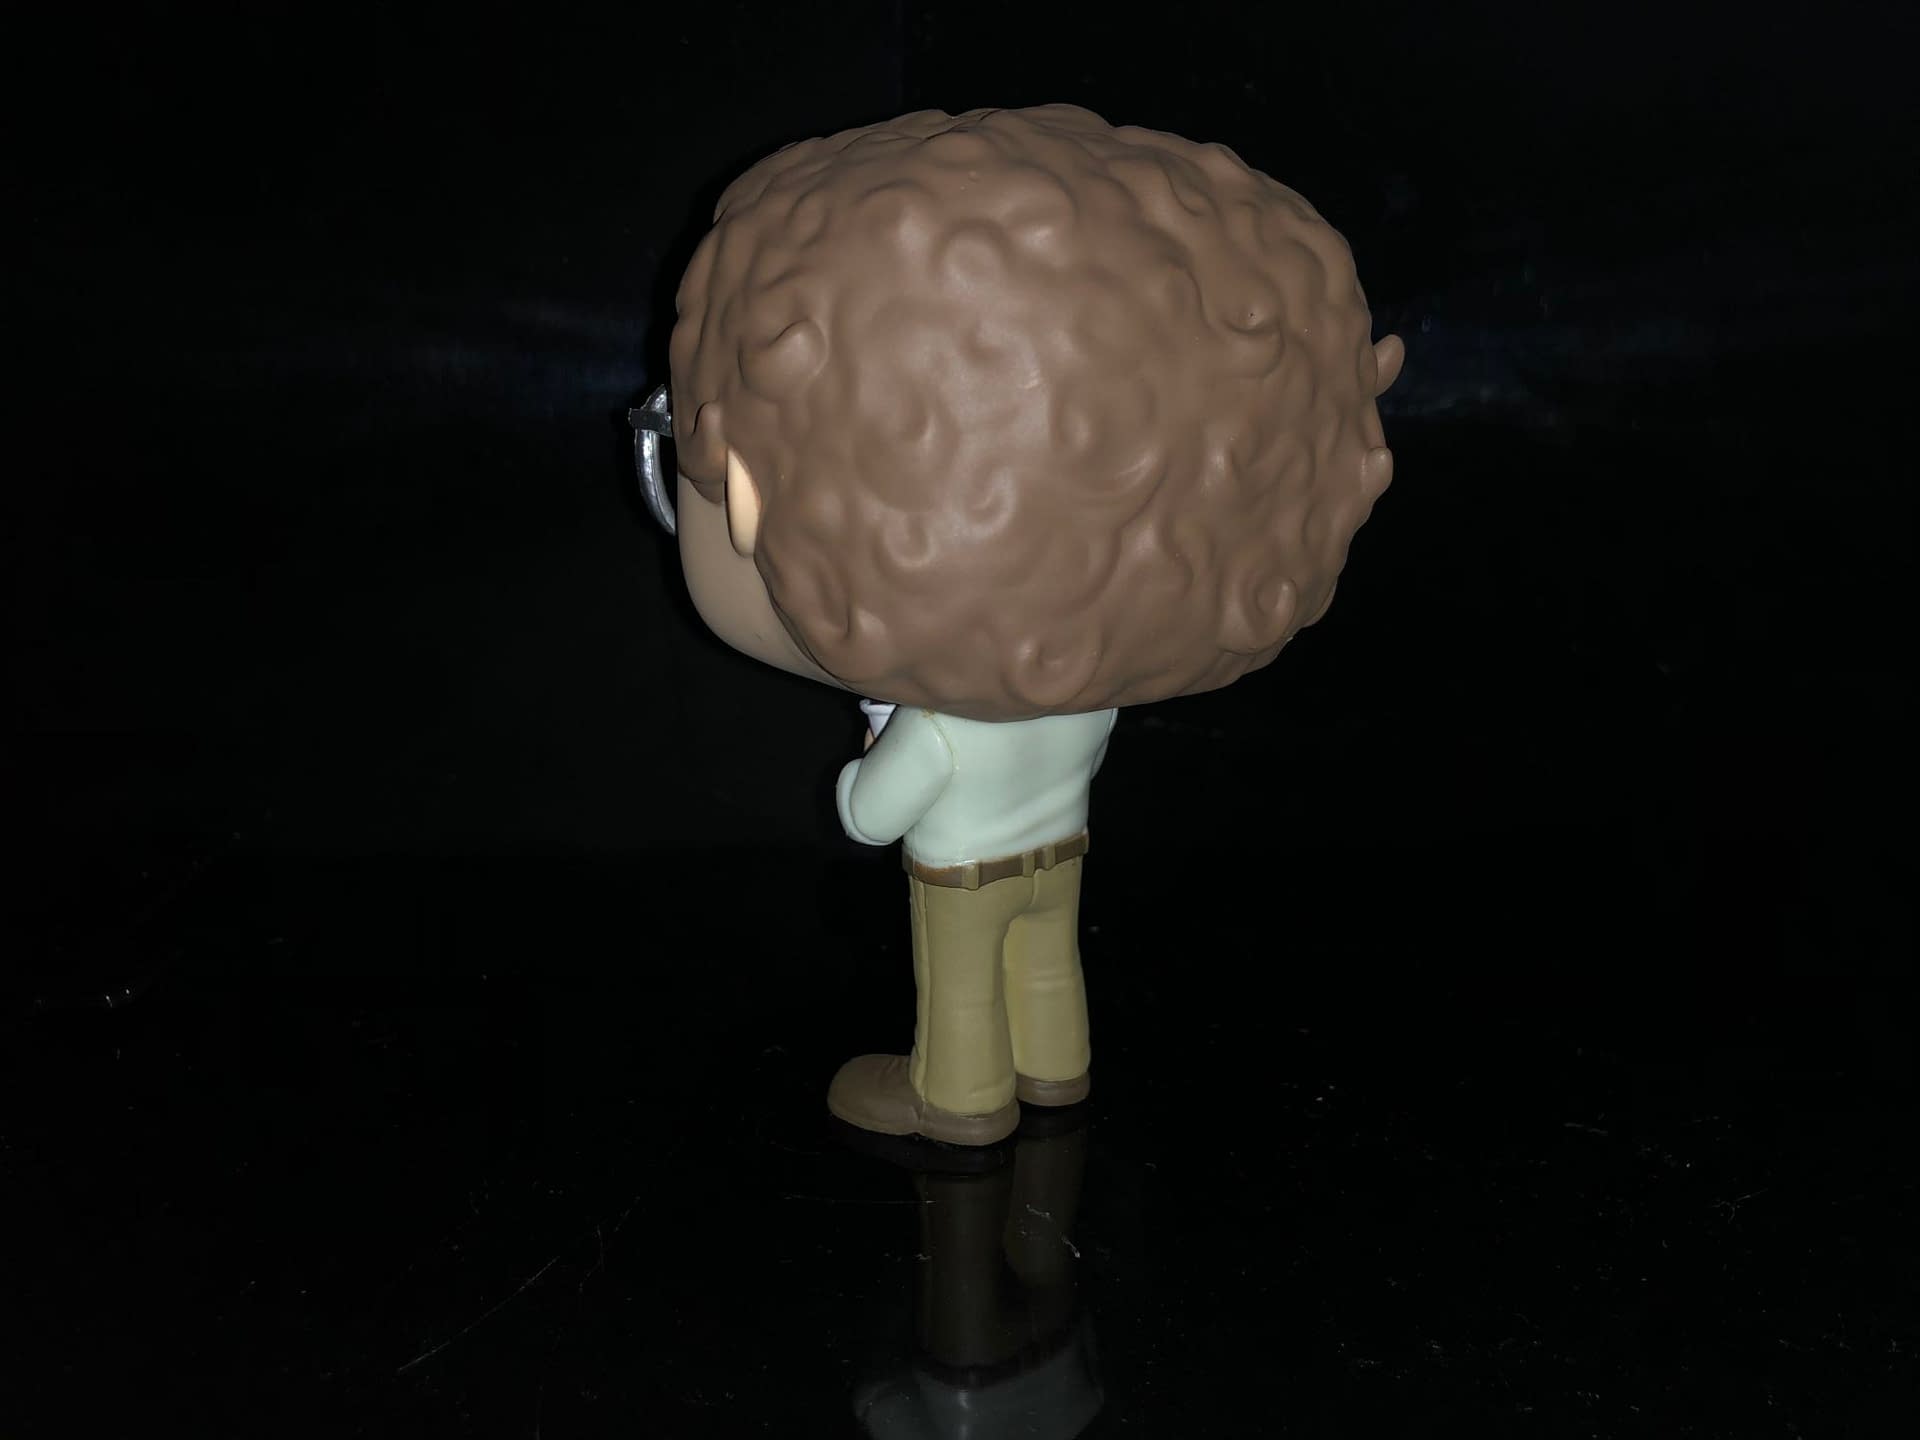 "Stranger Things" Newest Wave of Funko Pop Vinyls Arrive [Review]